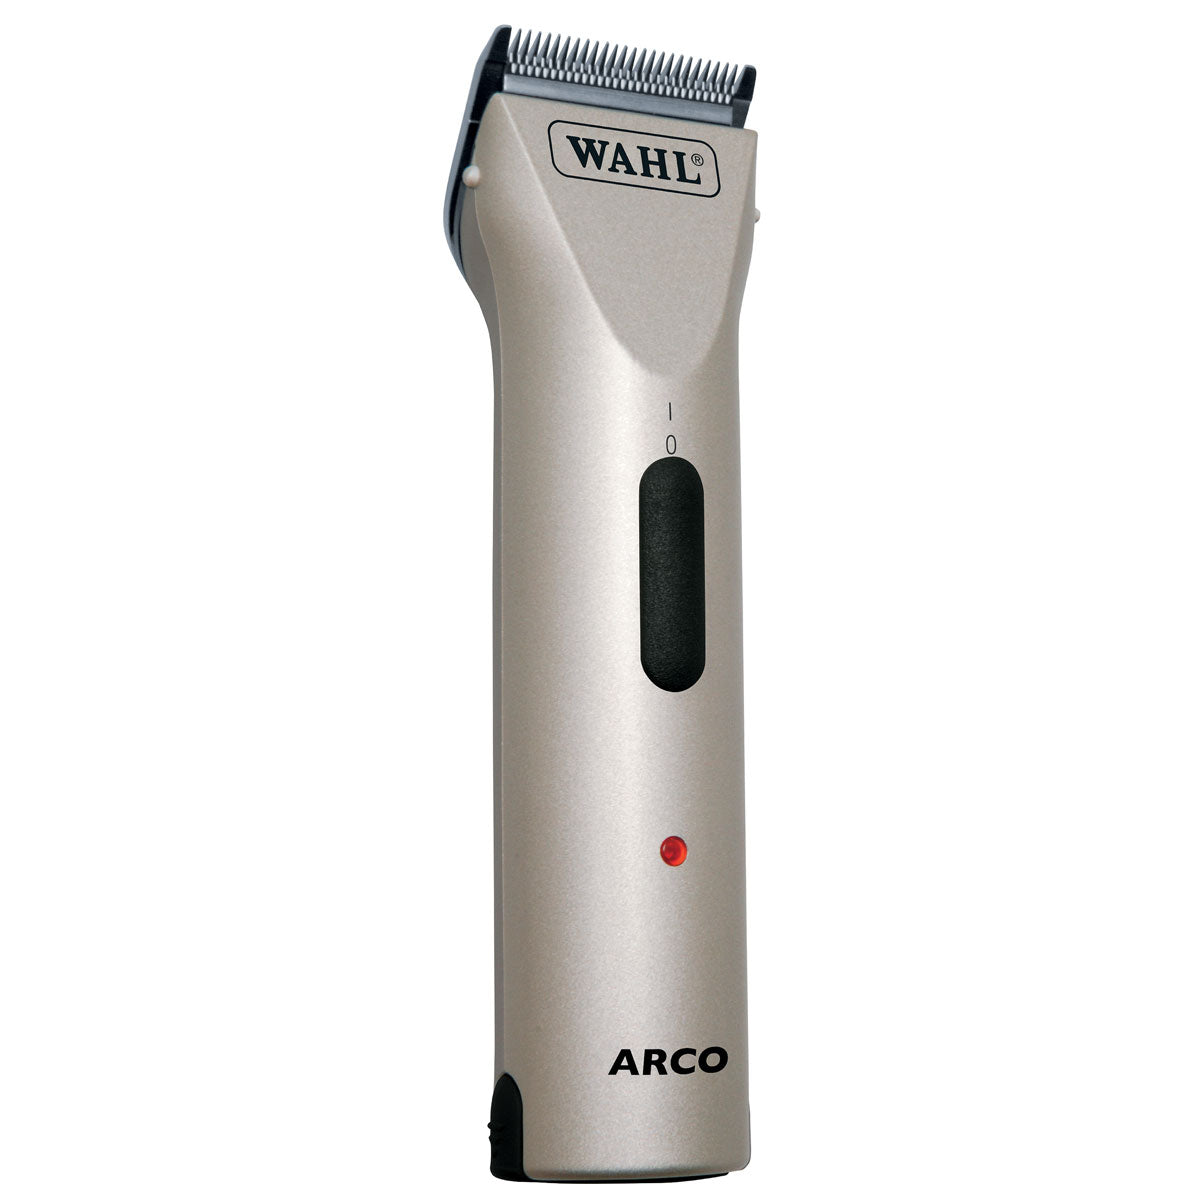 Wahl Arco Clipper with Attachments - Champagne